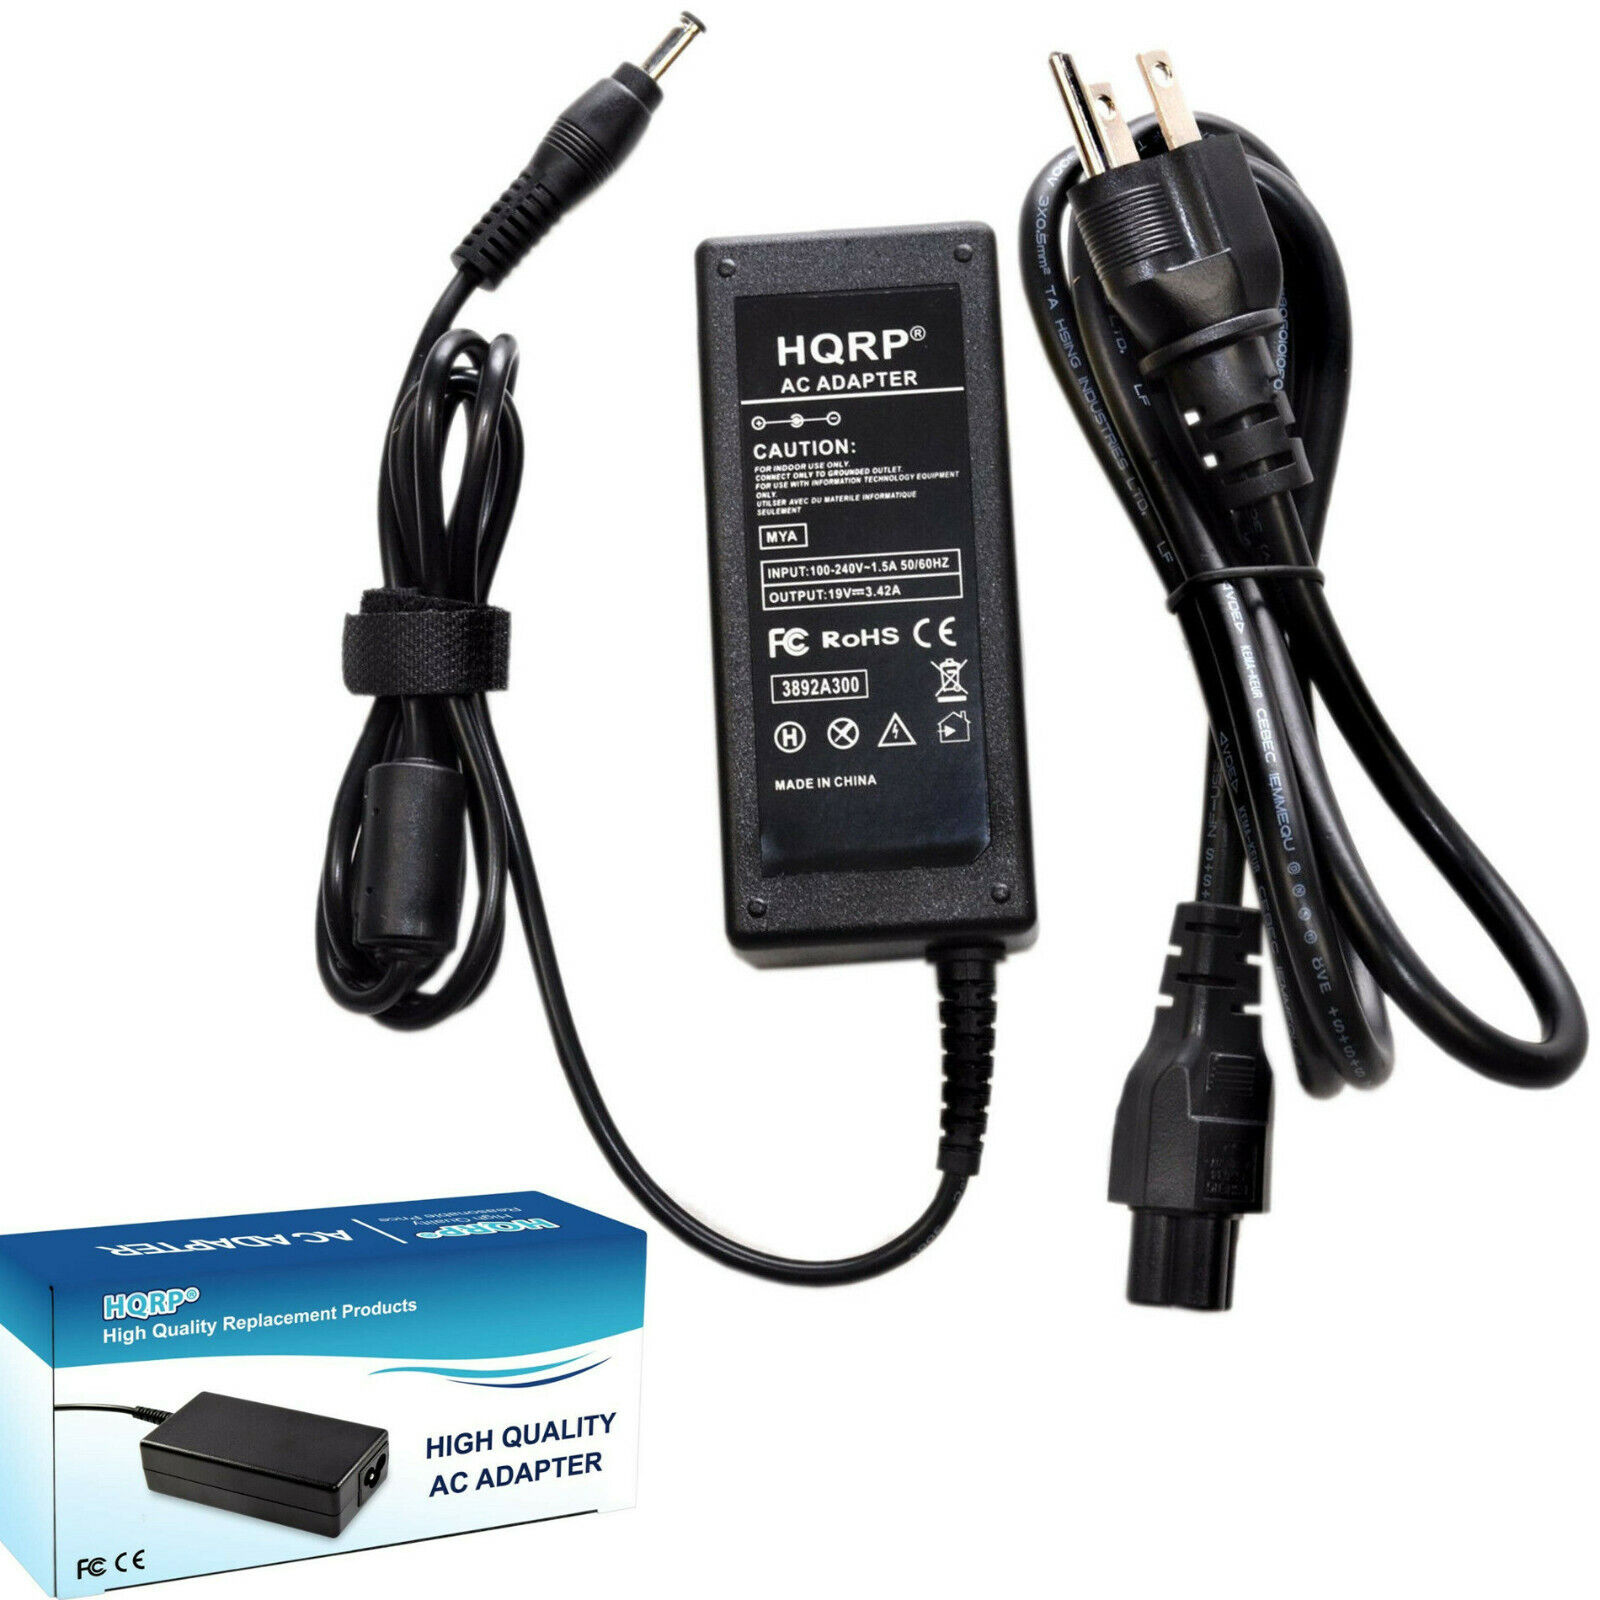 HQRP AC Adapter for Delta ADP-40KDBB LCD Monitor Power Supply Cord, ADP-40KD-BB